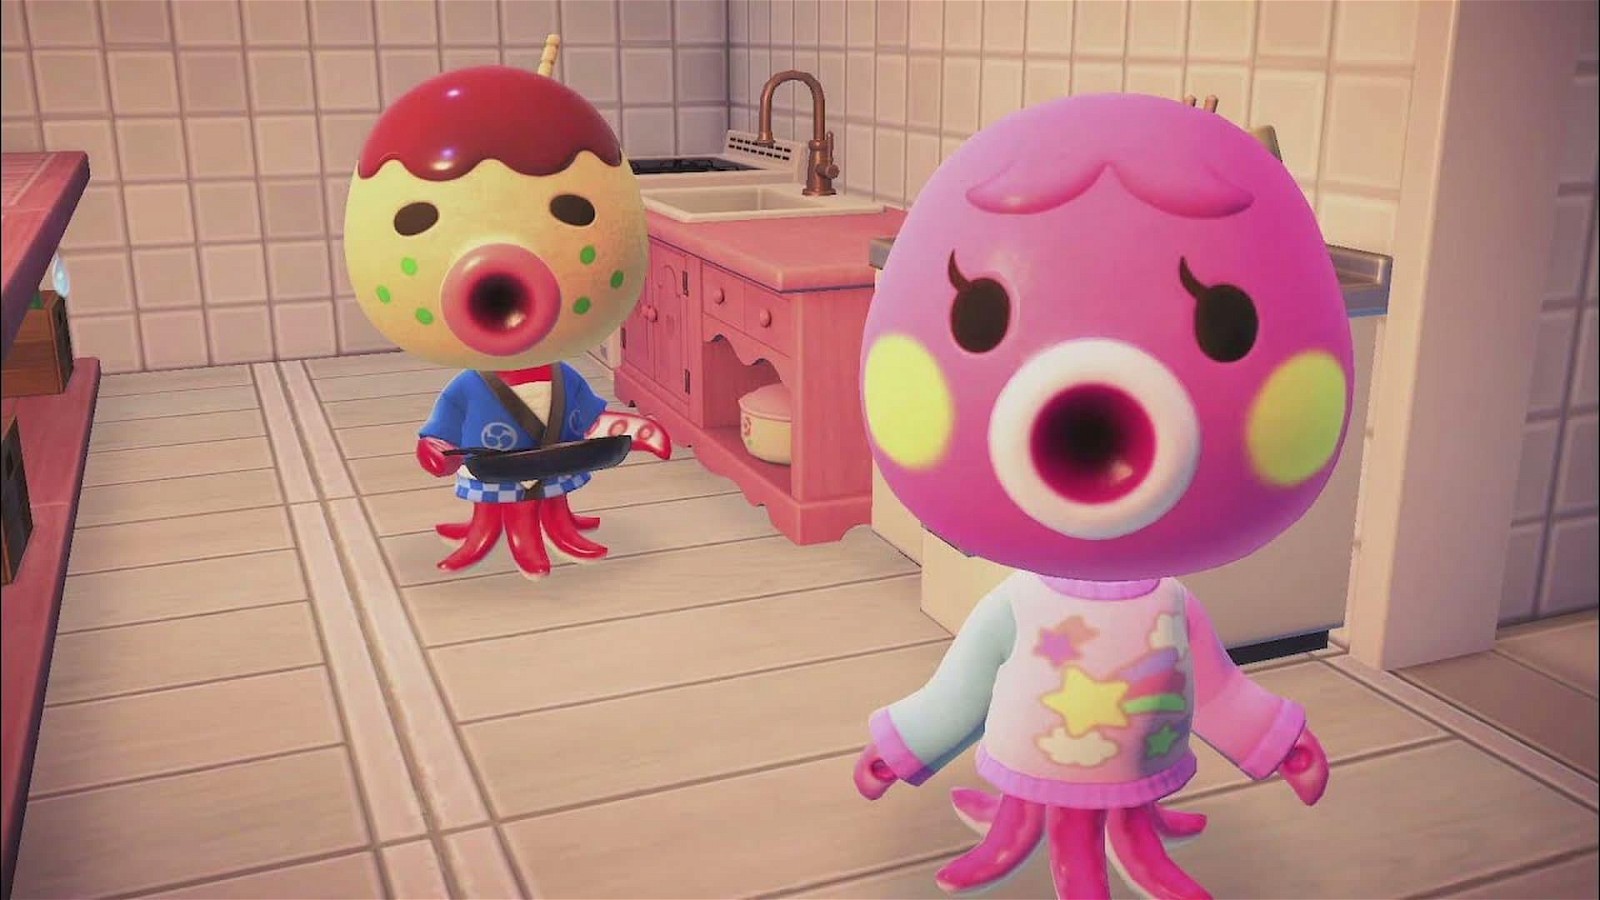 The Animal Crossing New Horizons bug gives Marina a Pinocchio-like feature.